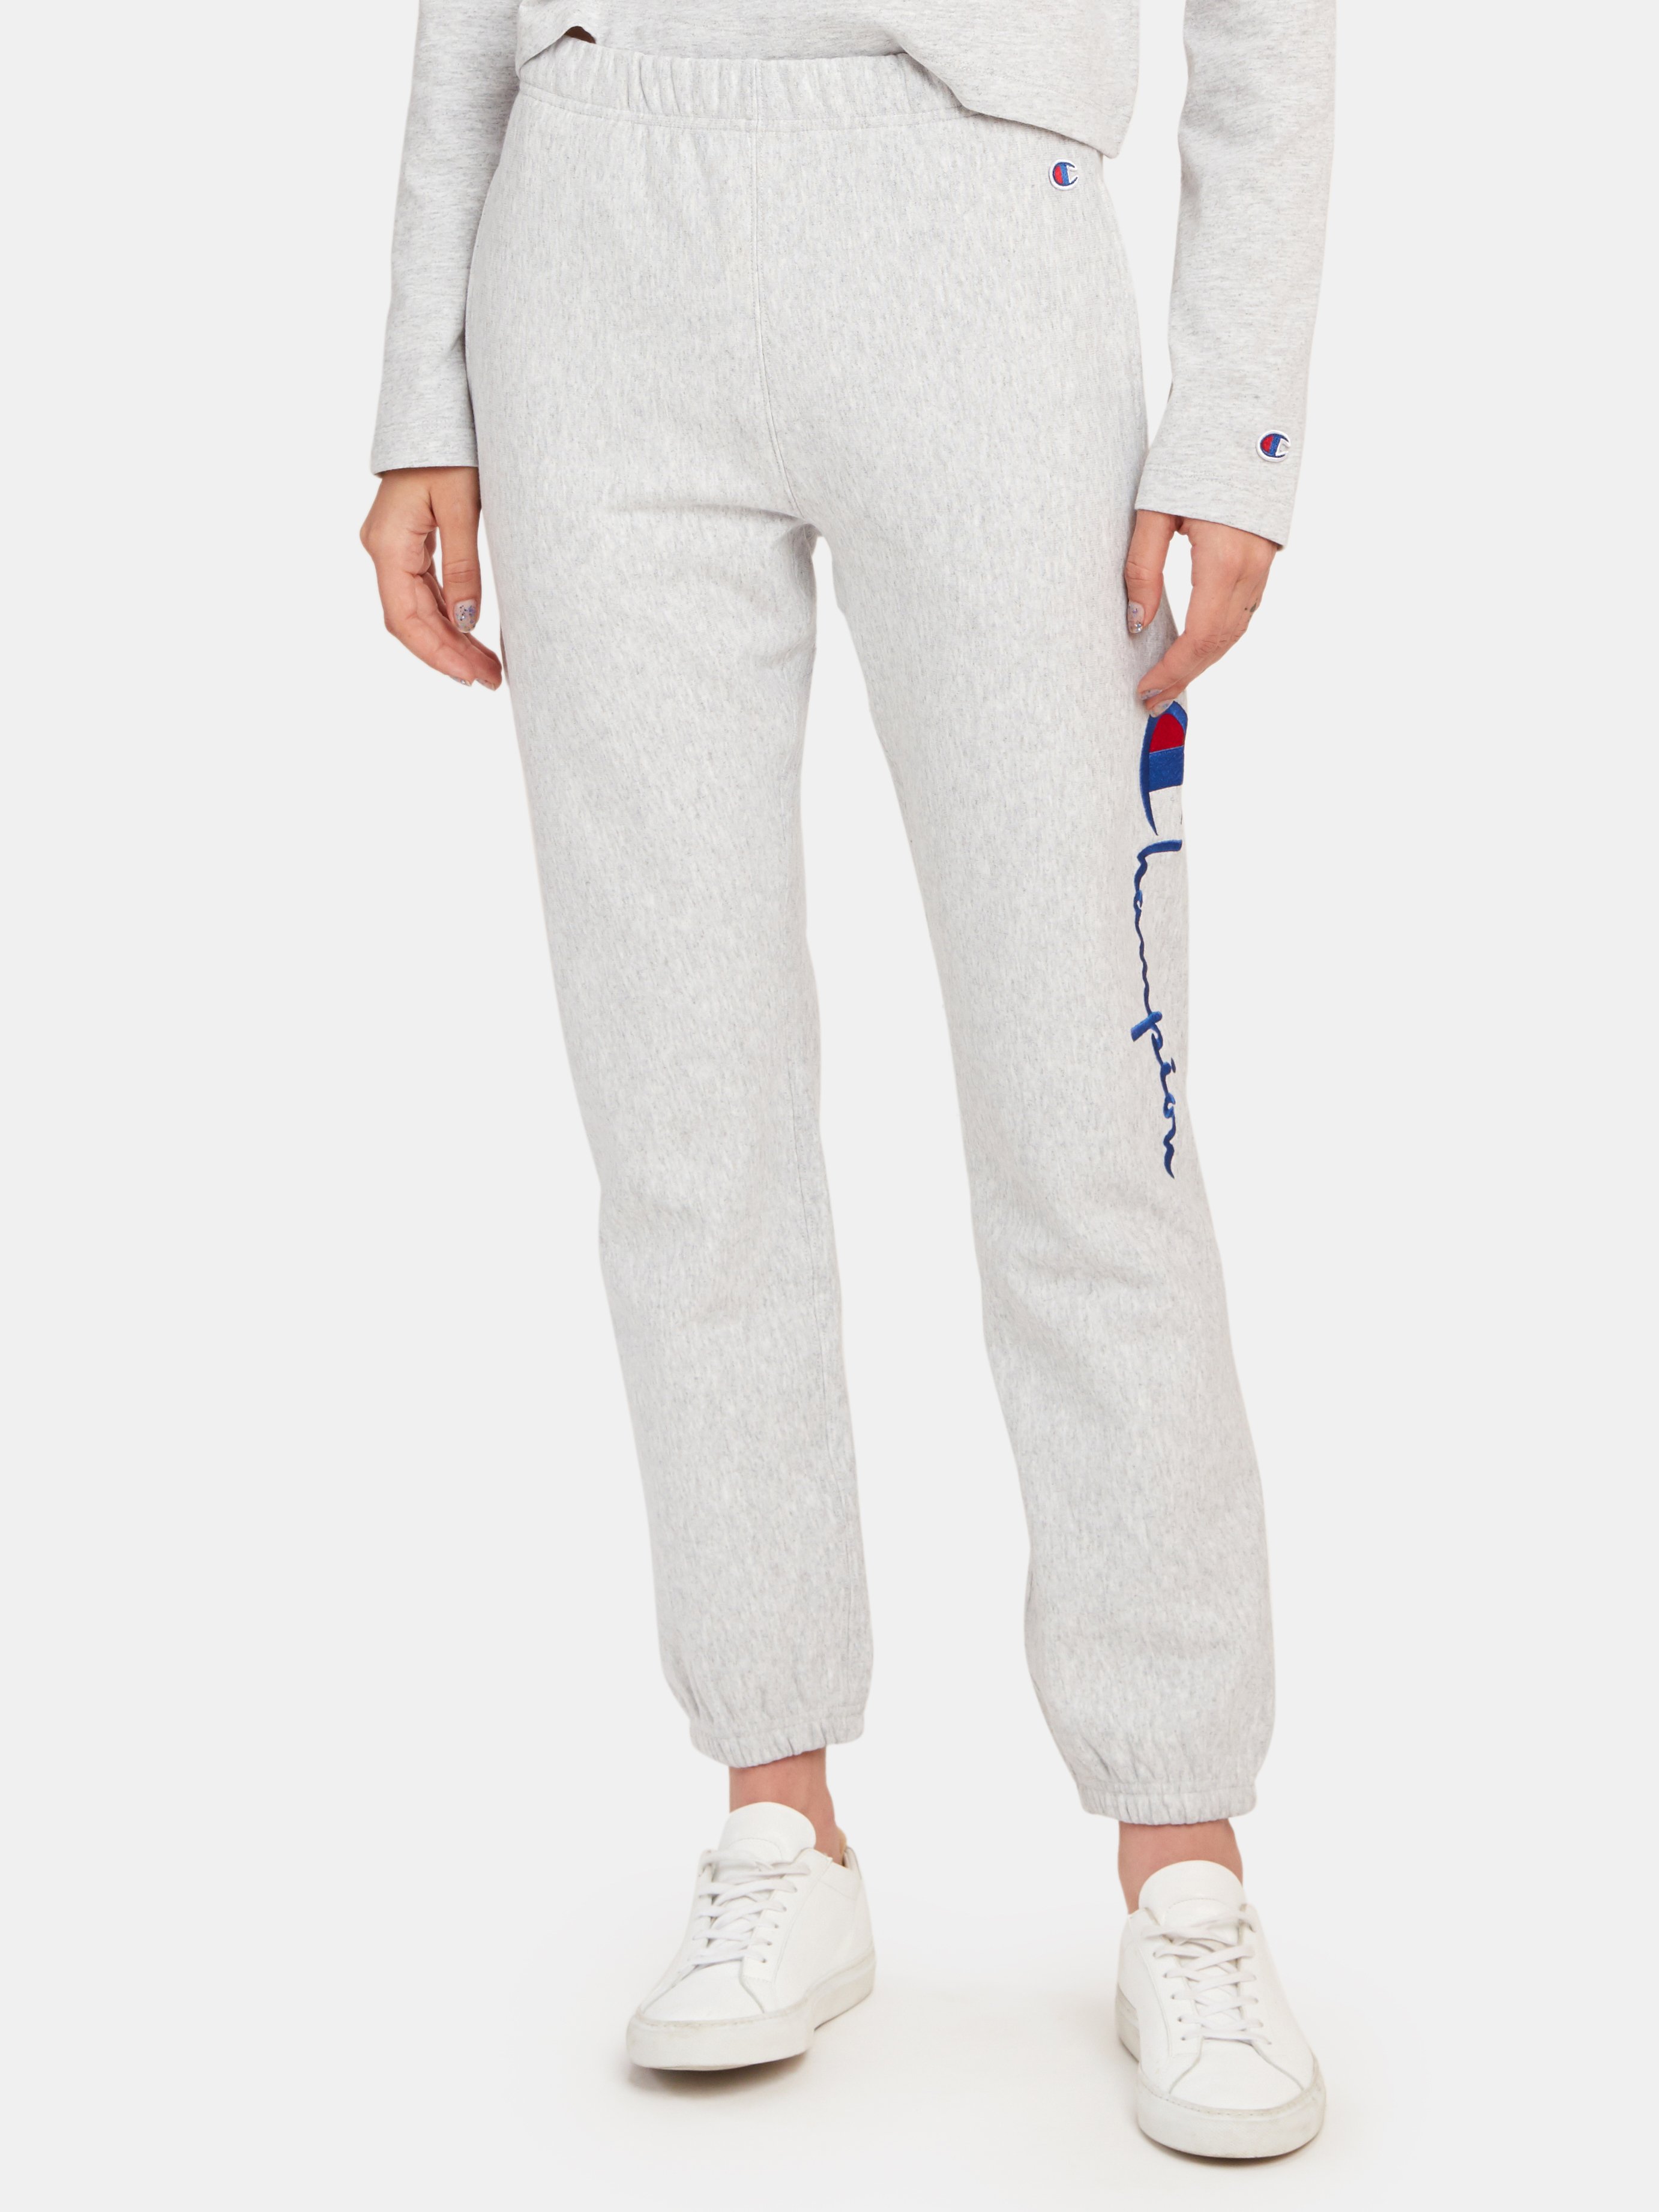 champion pants with logo on side